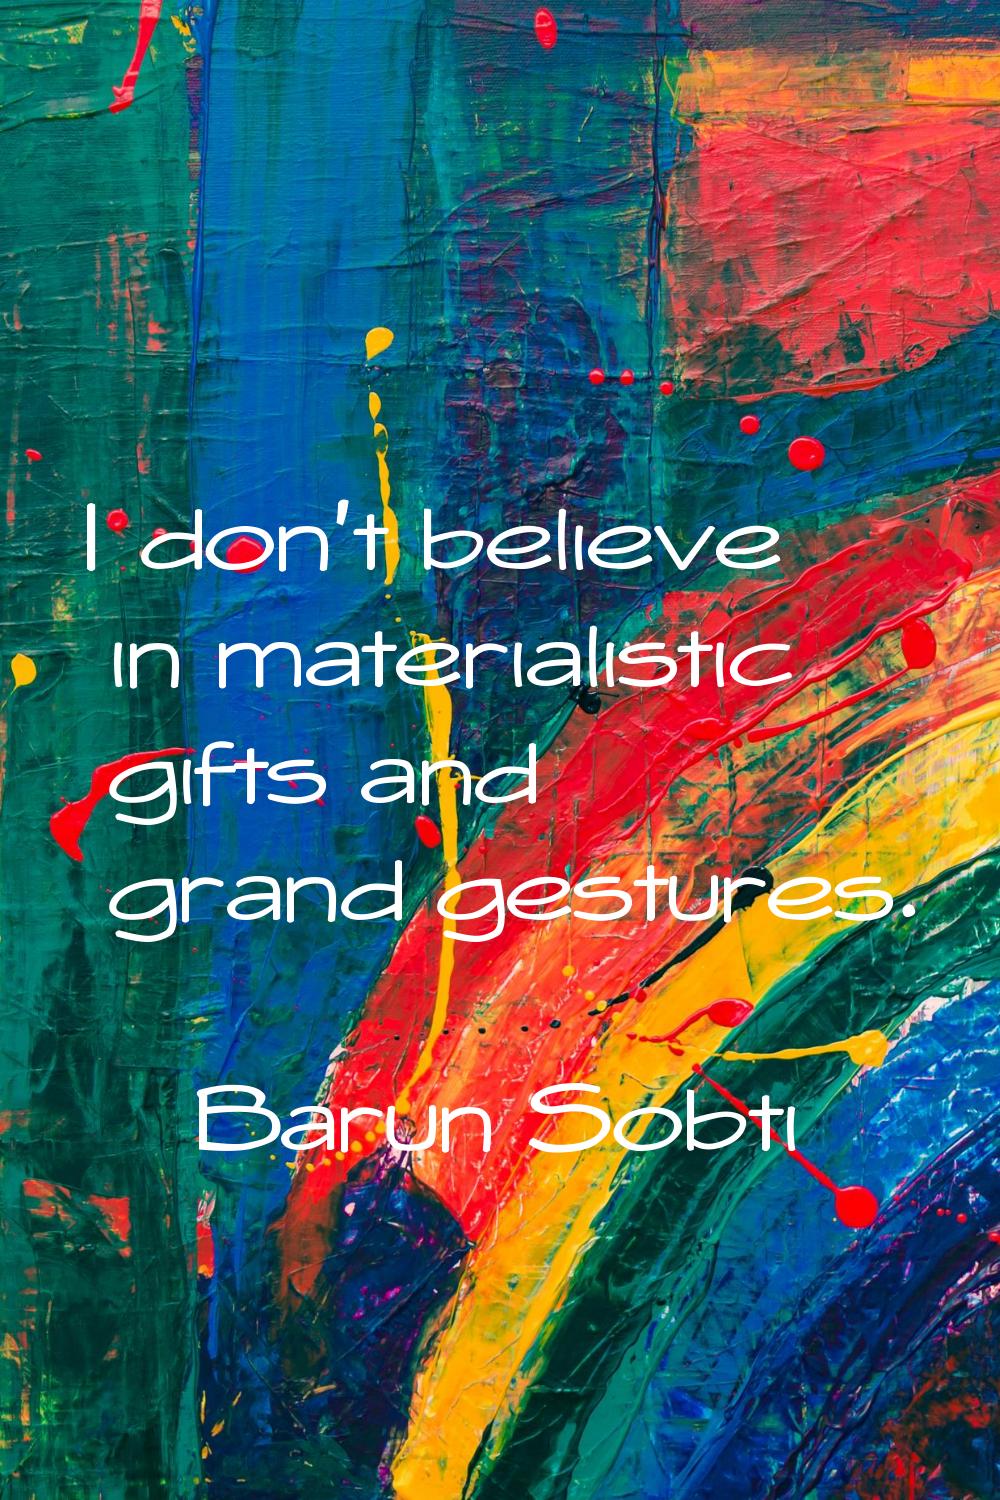 I don't believe in materialistic gifts and grand gestures.